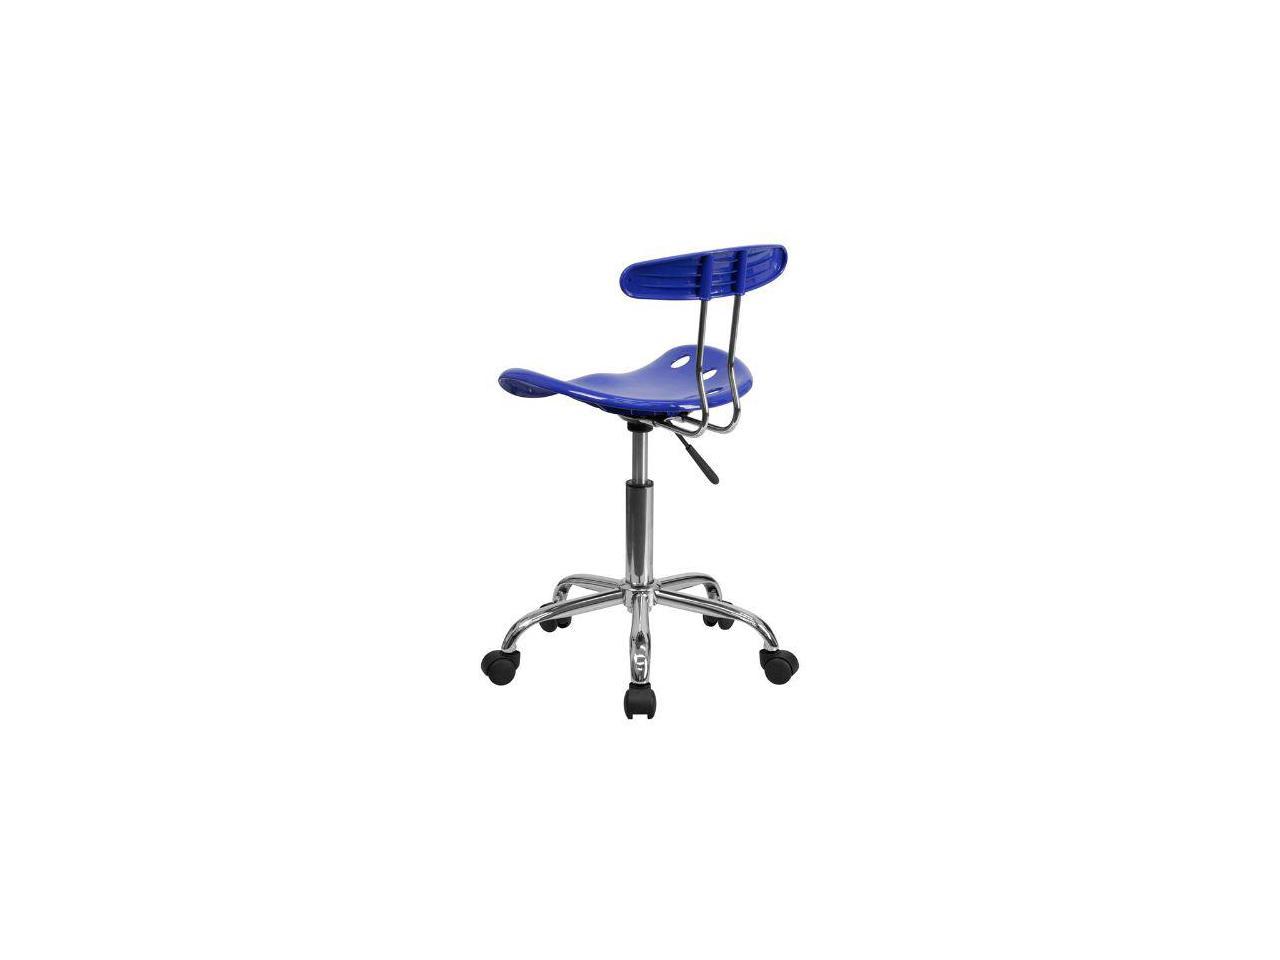 Vibrant Nautical Blue and Chrome Swivel Task Office Chair with Tractor